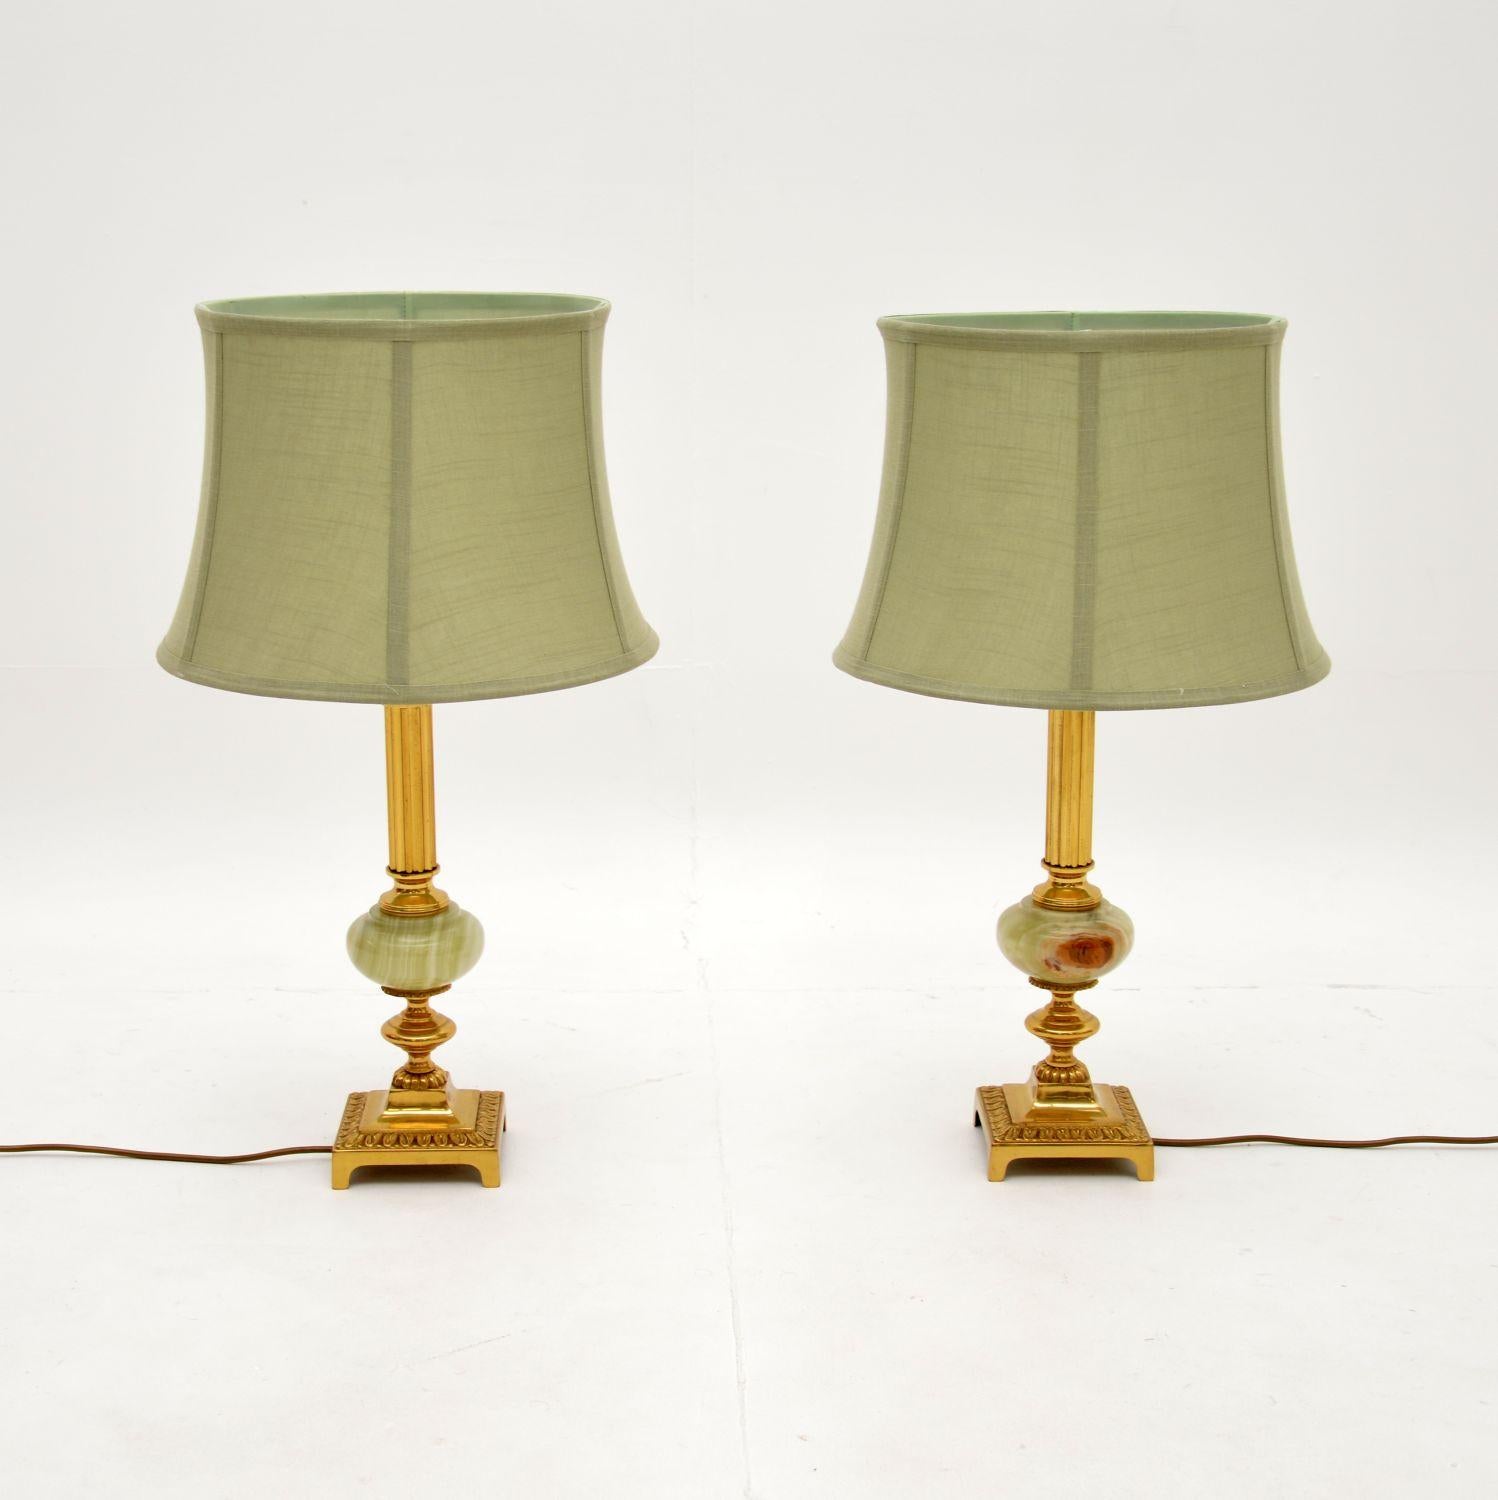 A wonderful pair of antique French brass and onyx table lamps, dating from around the 1930’s.

They are of superb quality and are a lovely size. They have fluted brass columns and sit on brass platform bases, joined together by elliptical onyx